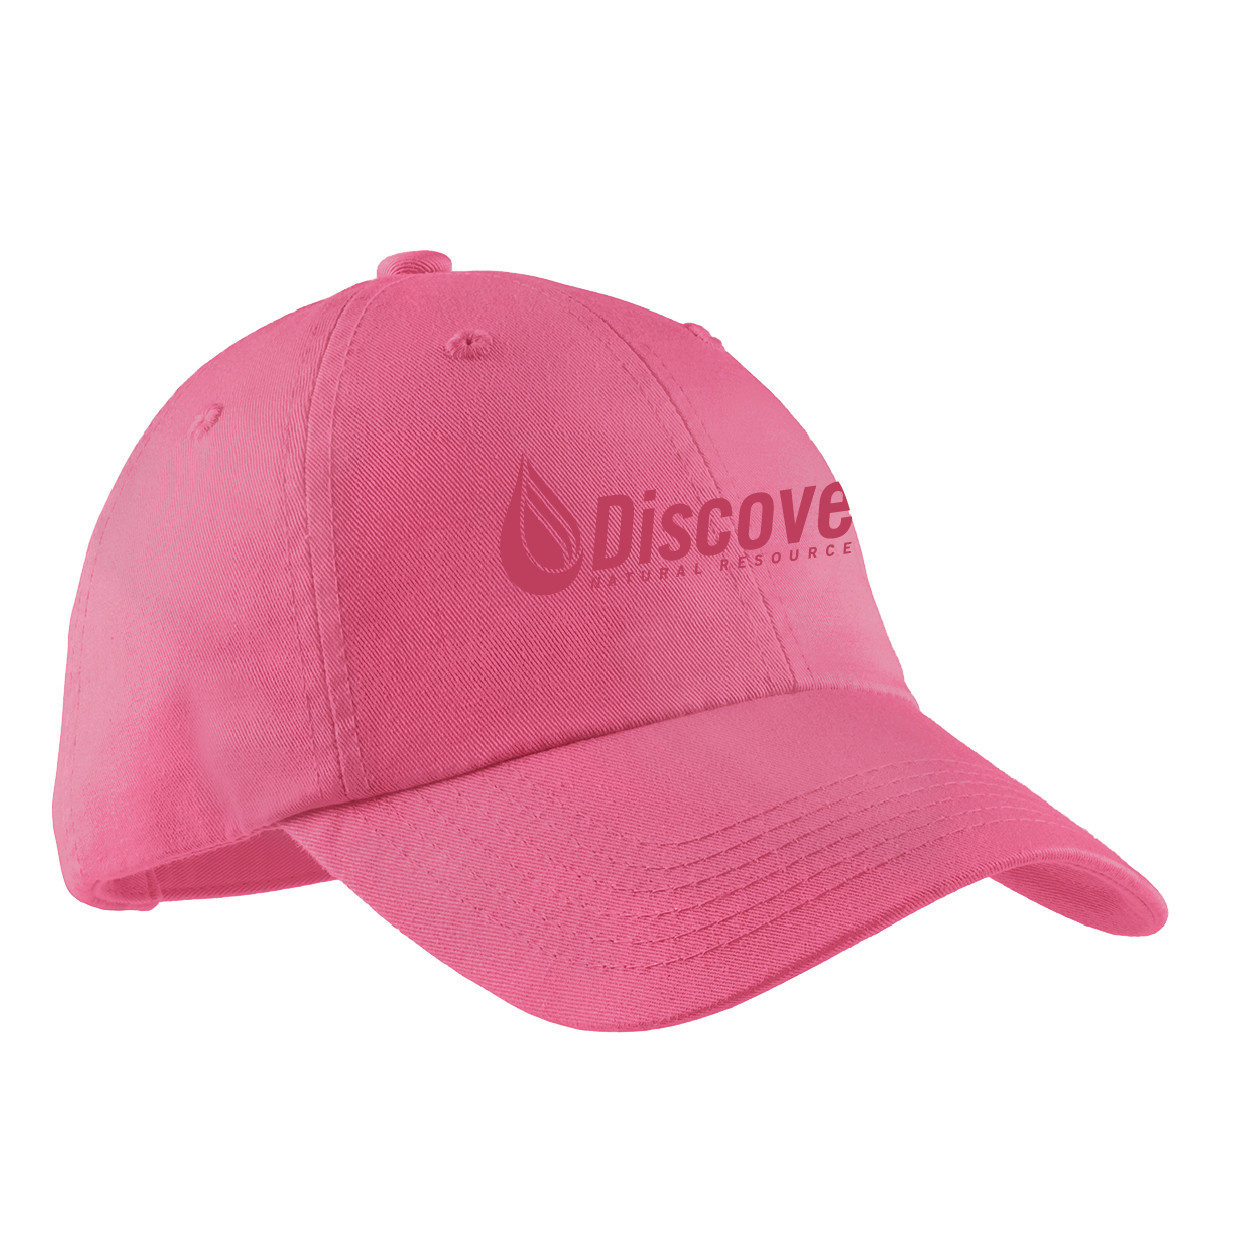 Port Authority Port Authority Ladies Garment Washed Cap (Bright Pink)